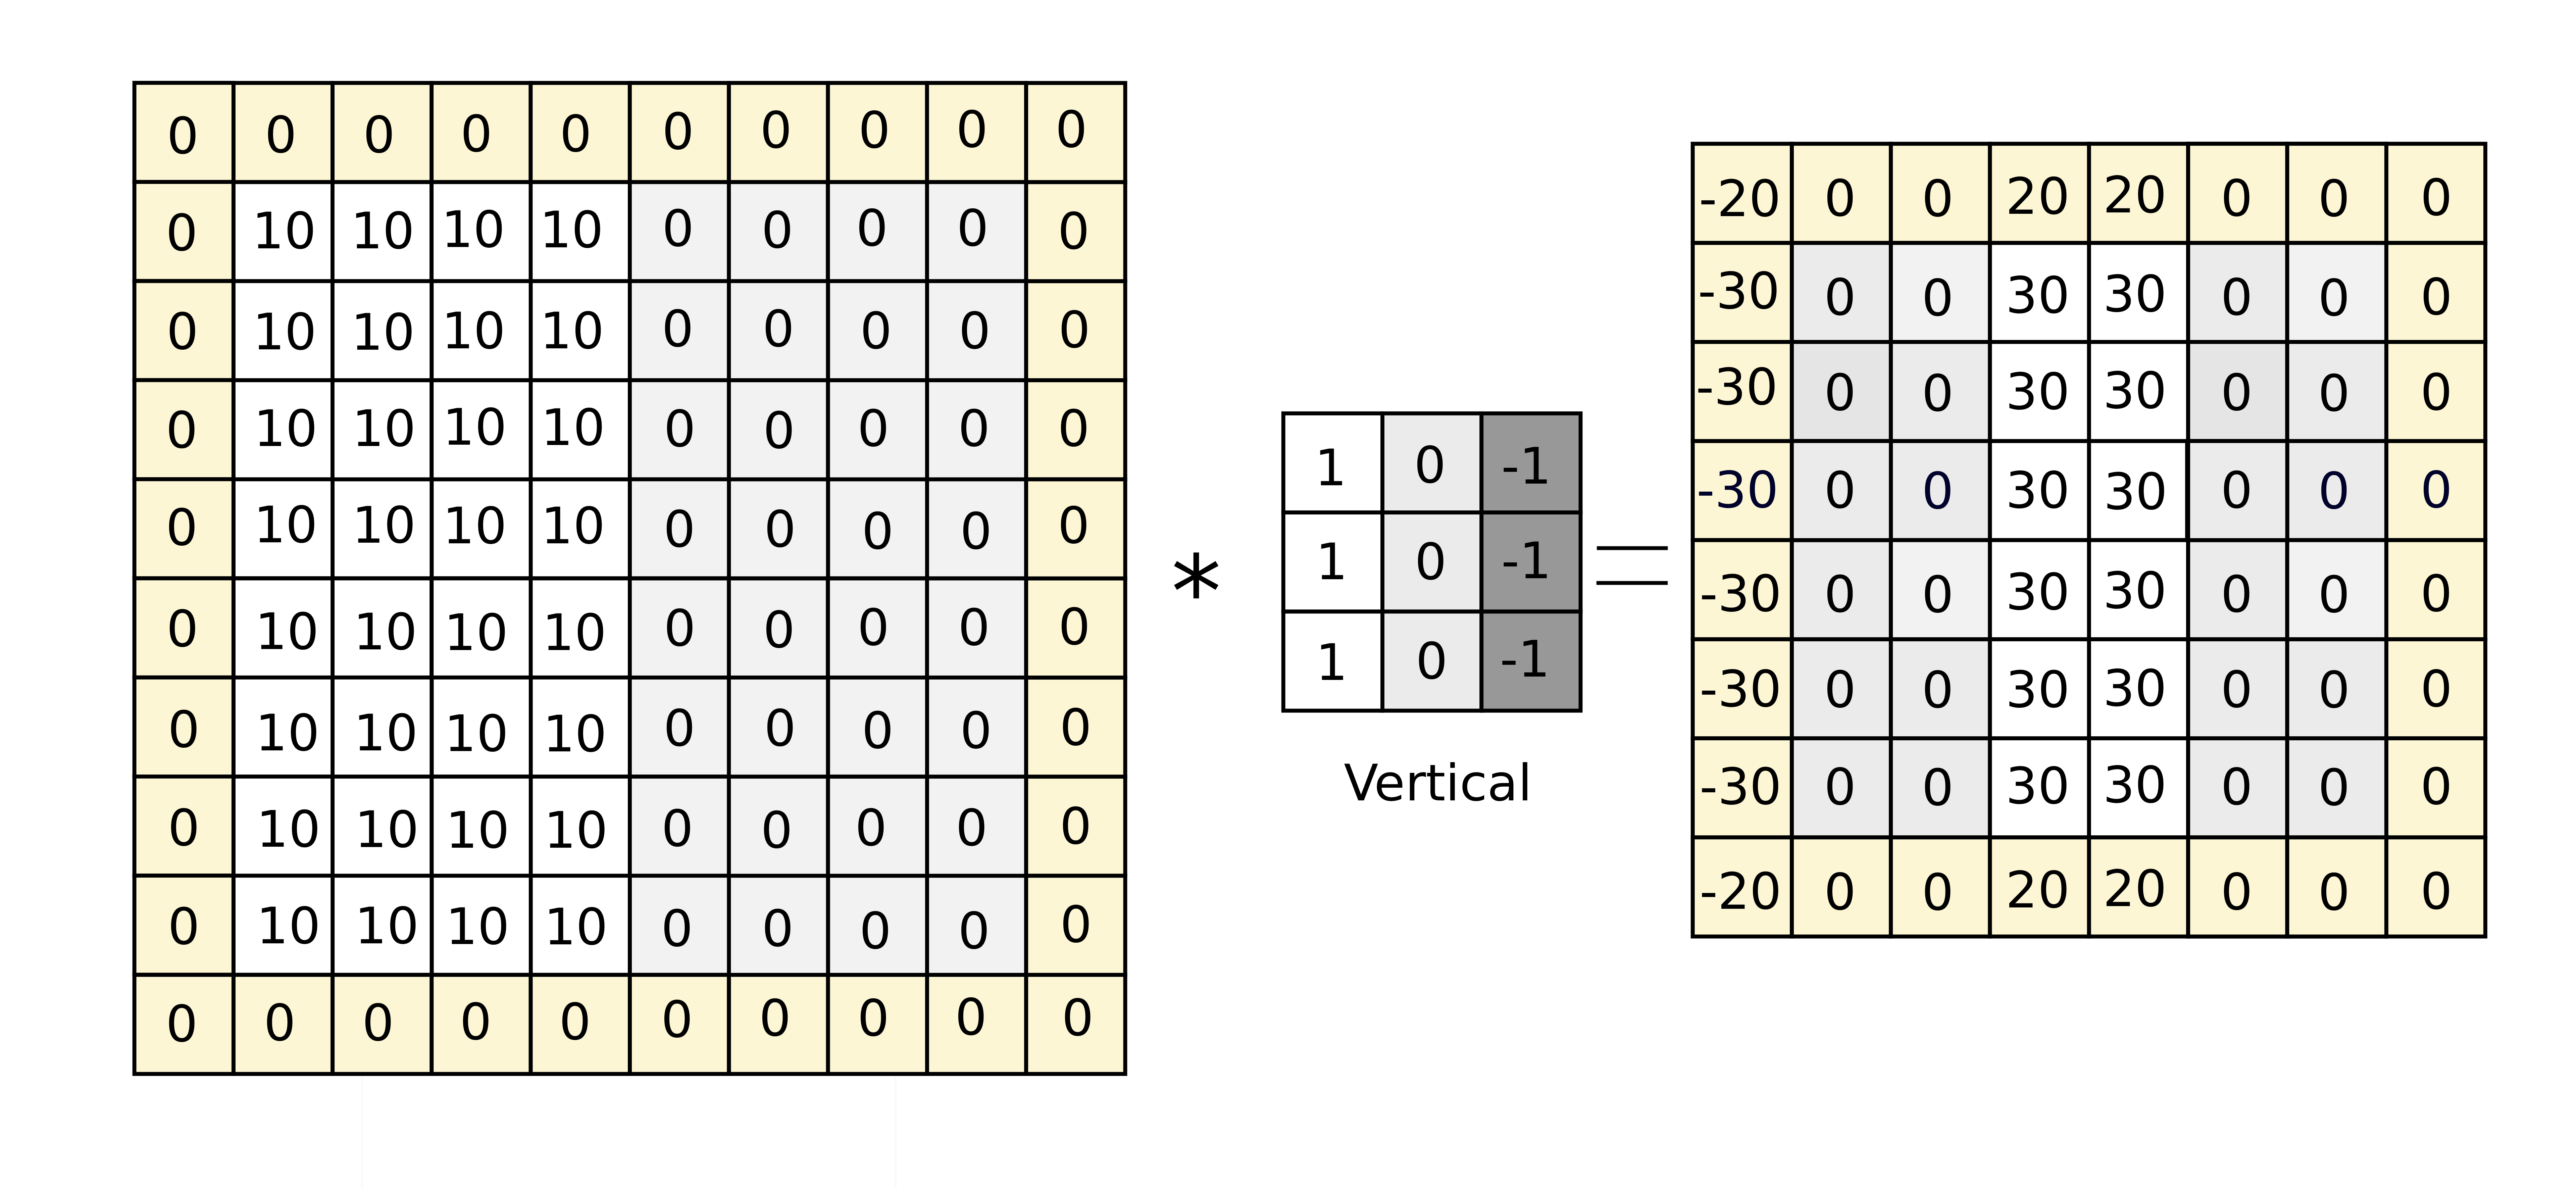 An illustration of padding and convolution operations in the CNN model.